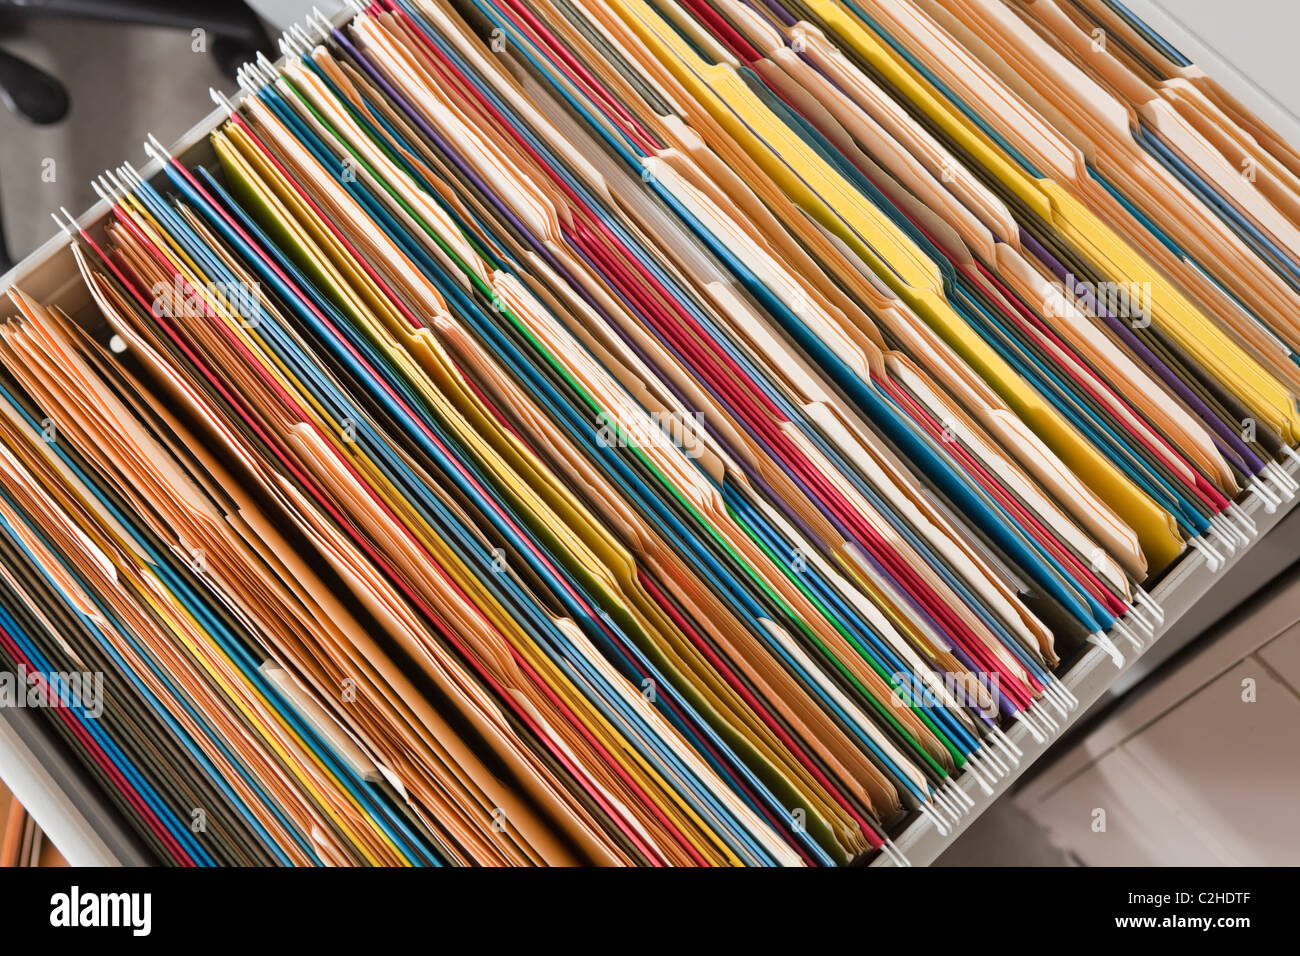 Packed file cabinet with colorful hanging file folders. Stock Photo